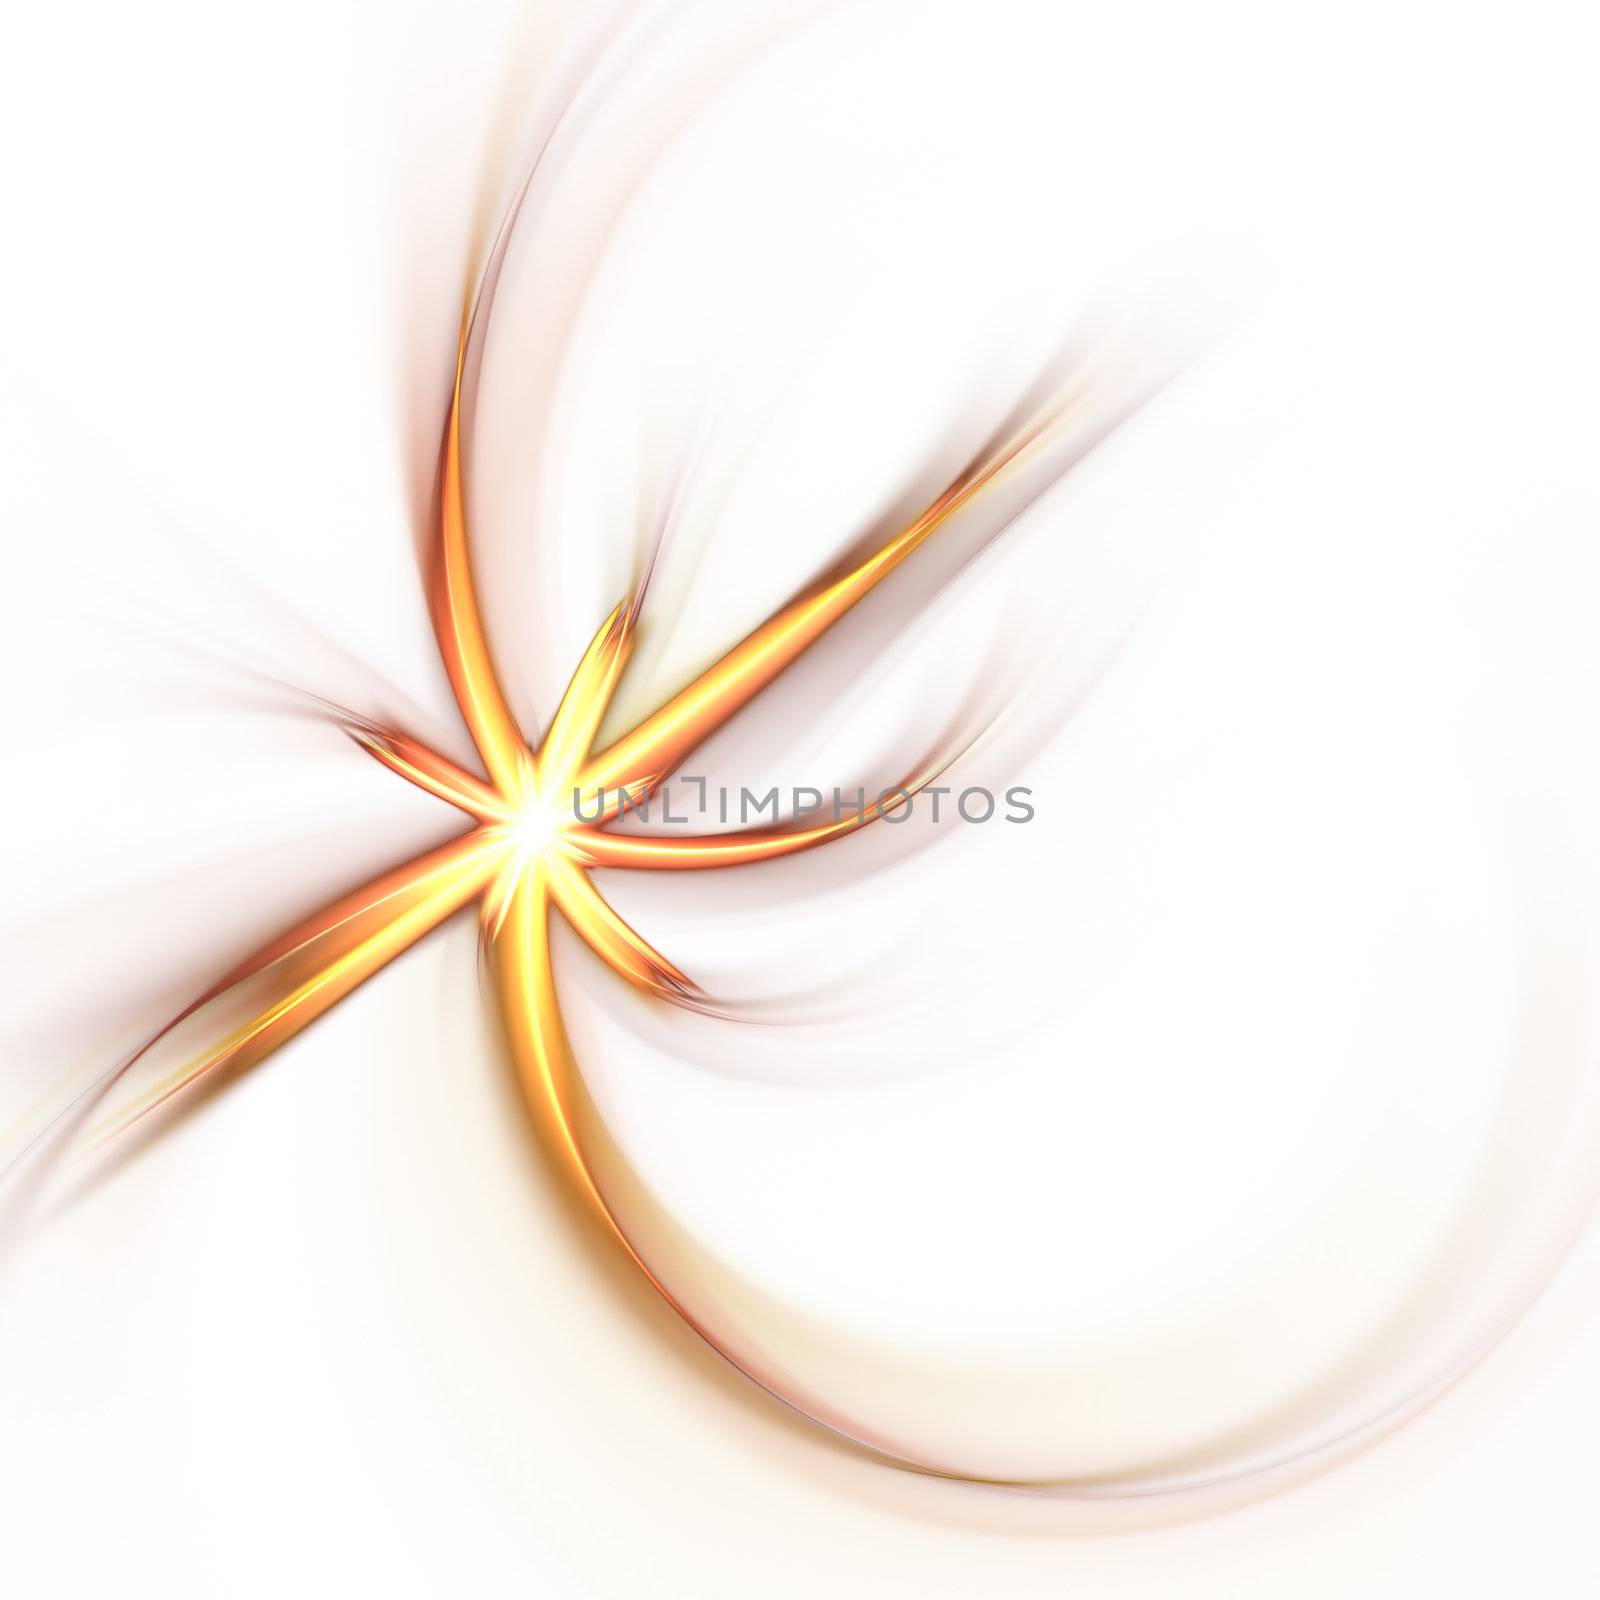 An abstract solar flare isolated over a white background.